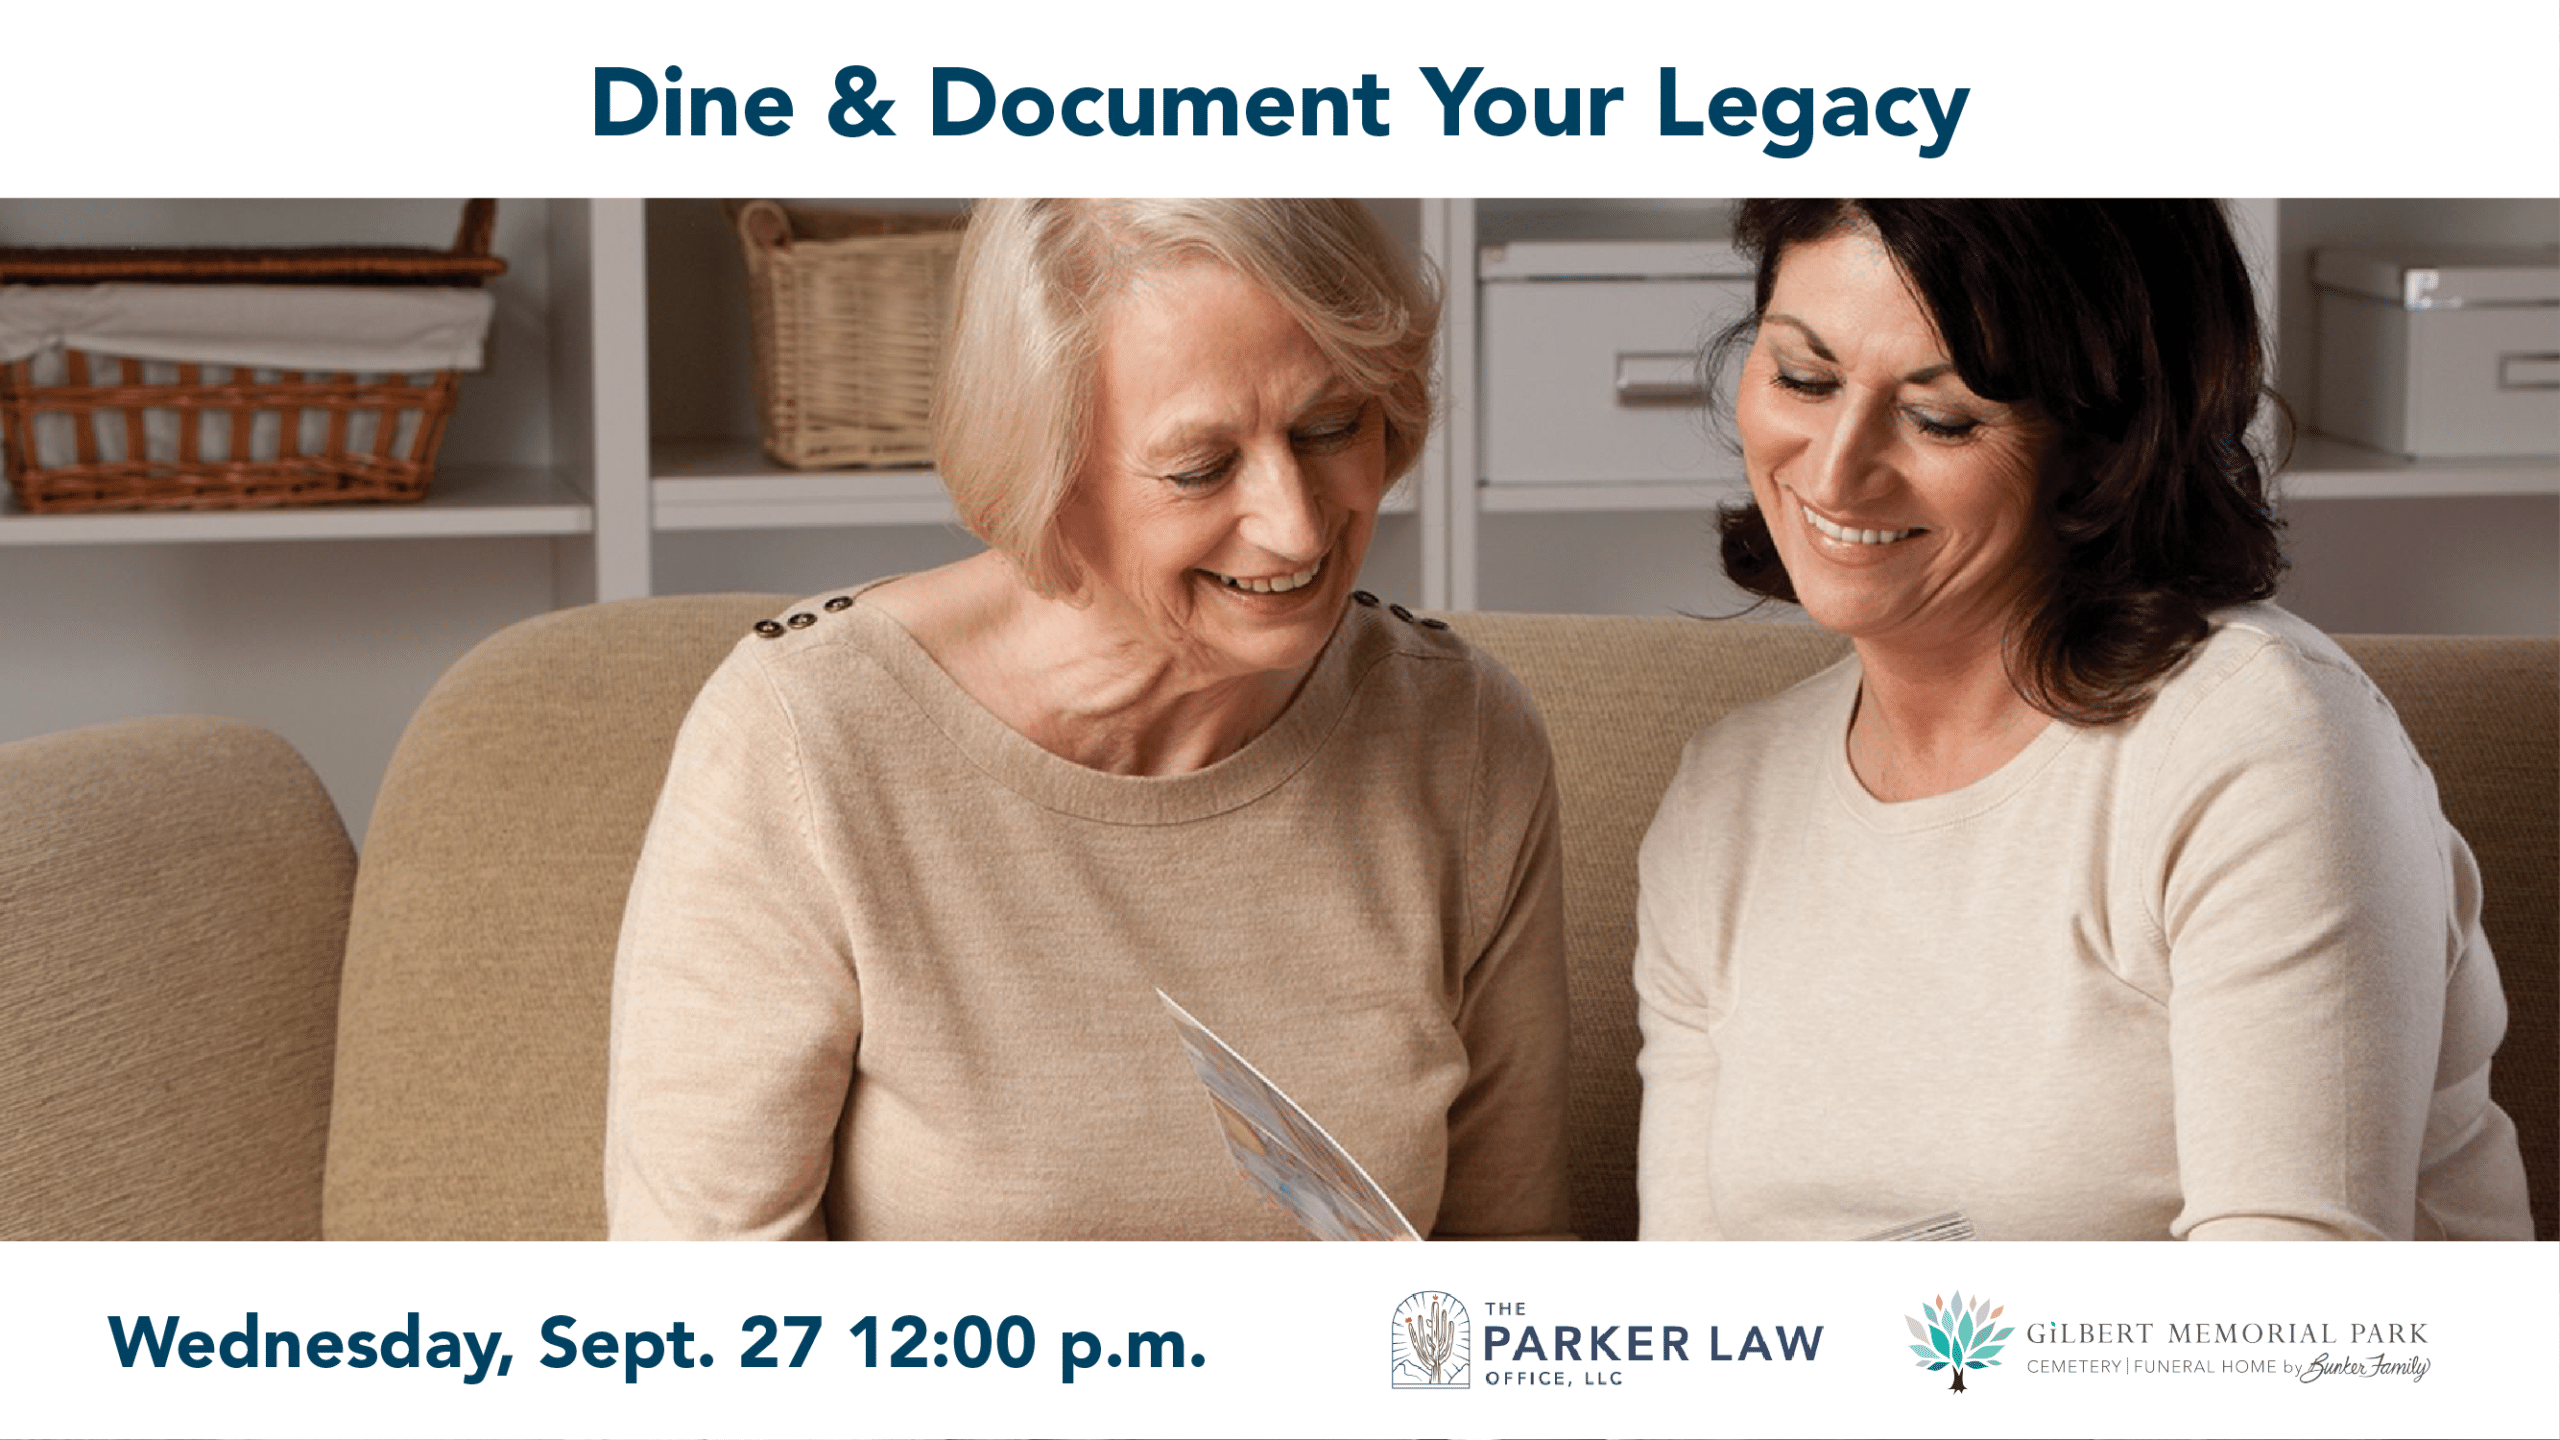 Dine and Document Your Legacy: Presentation and Lunch